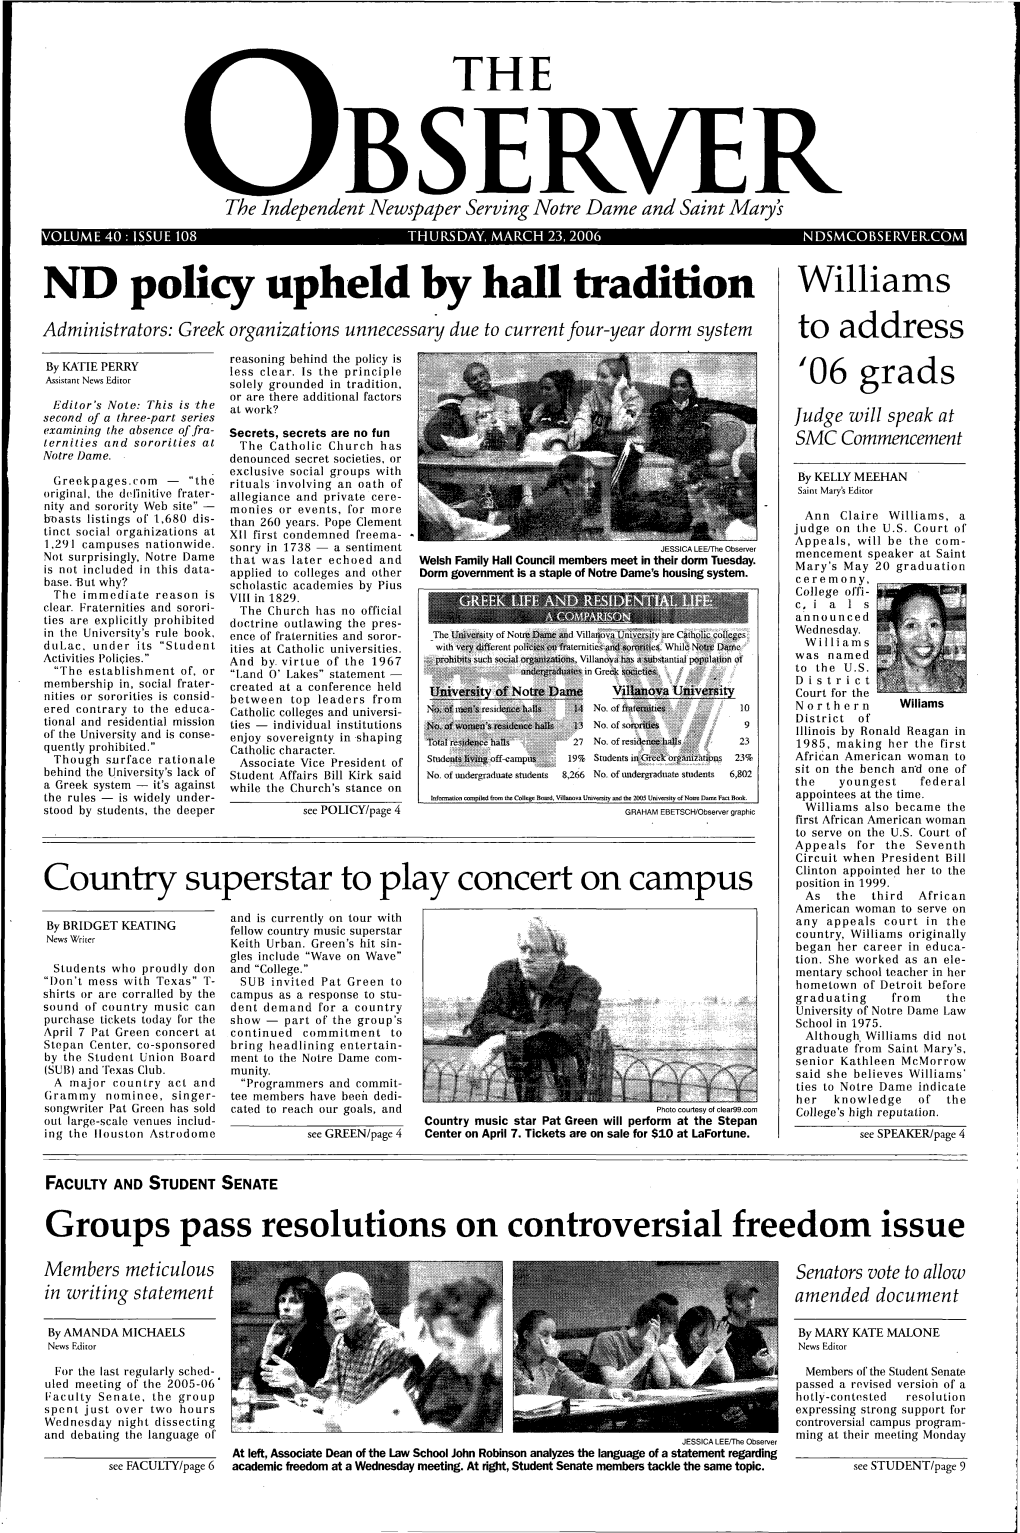 ND Policy Upheld by Hall Tradition